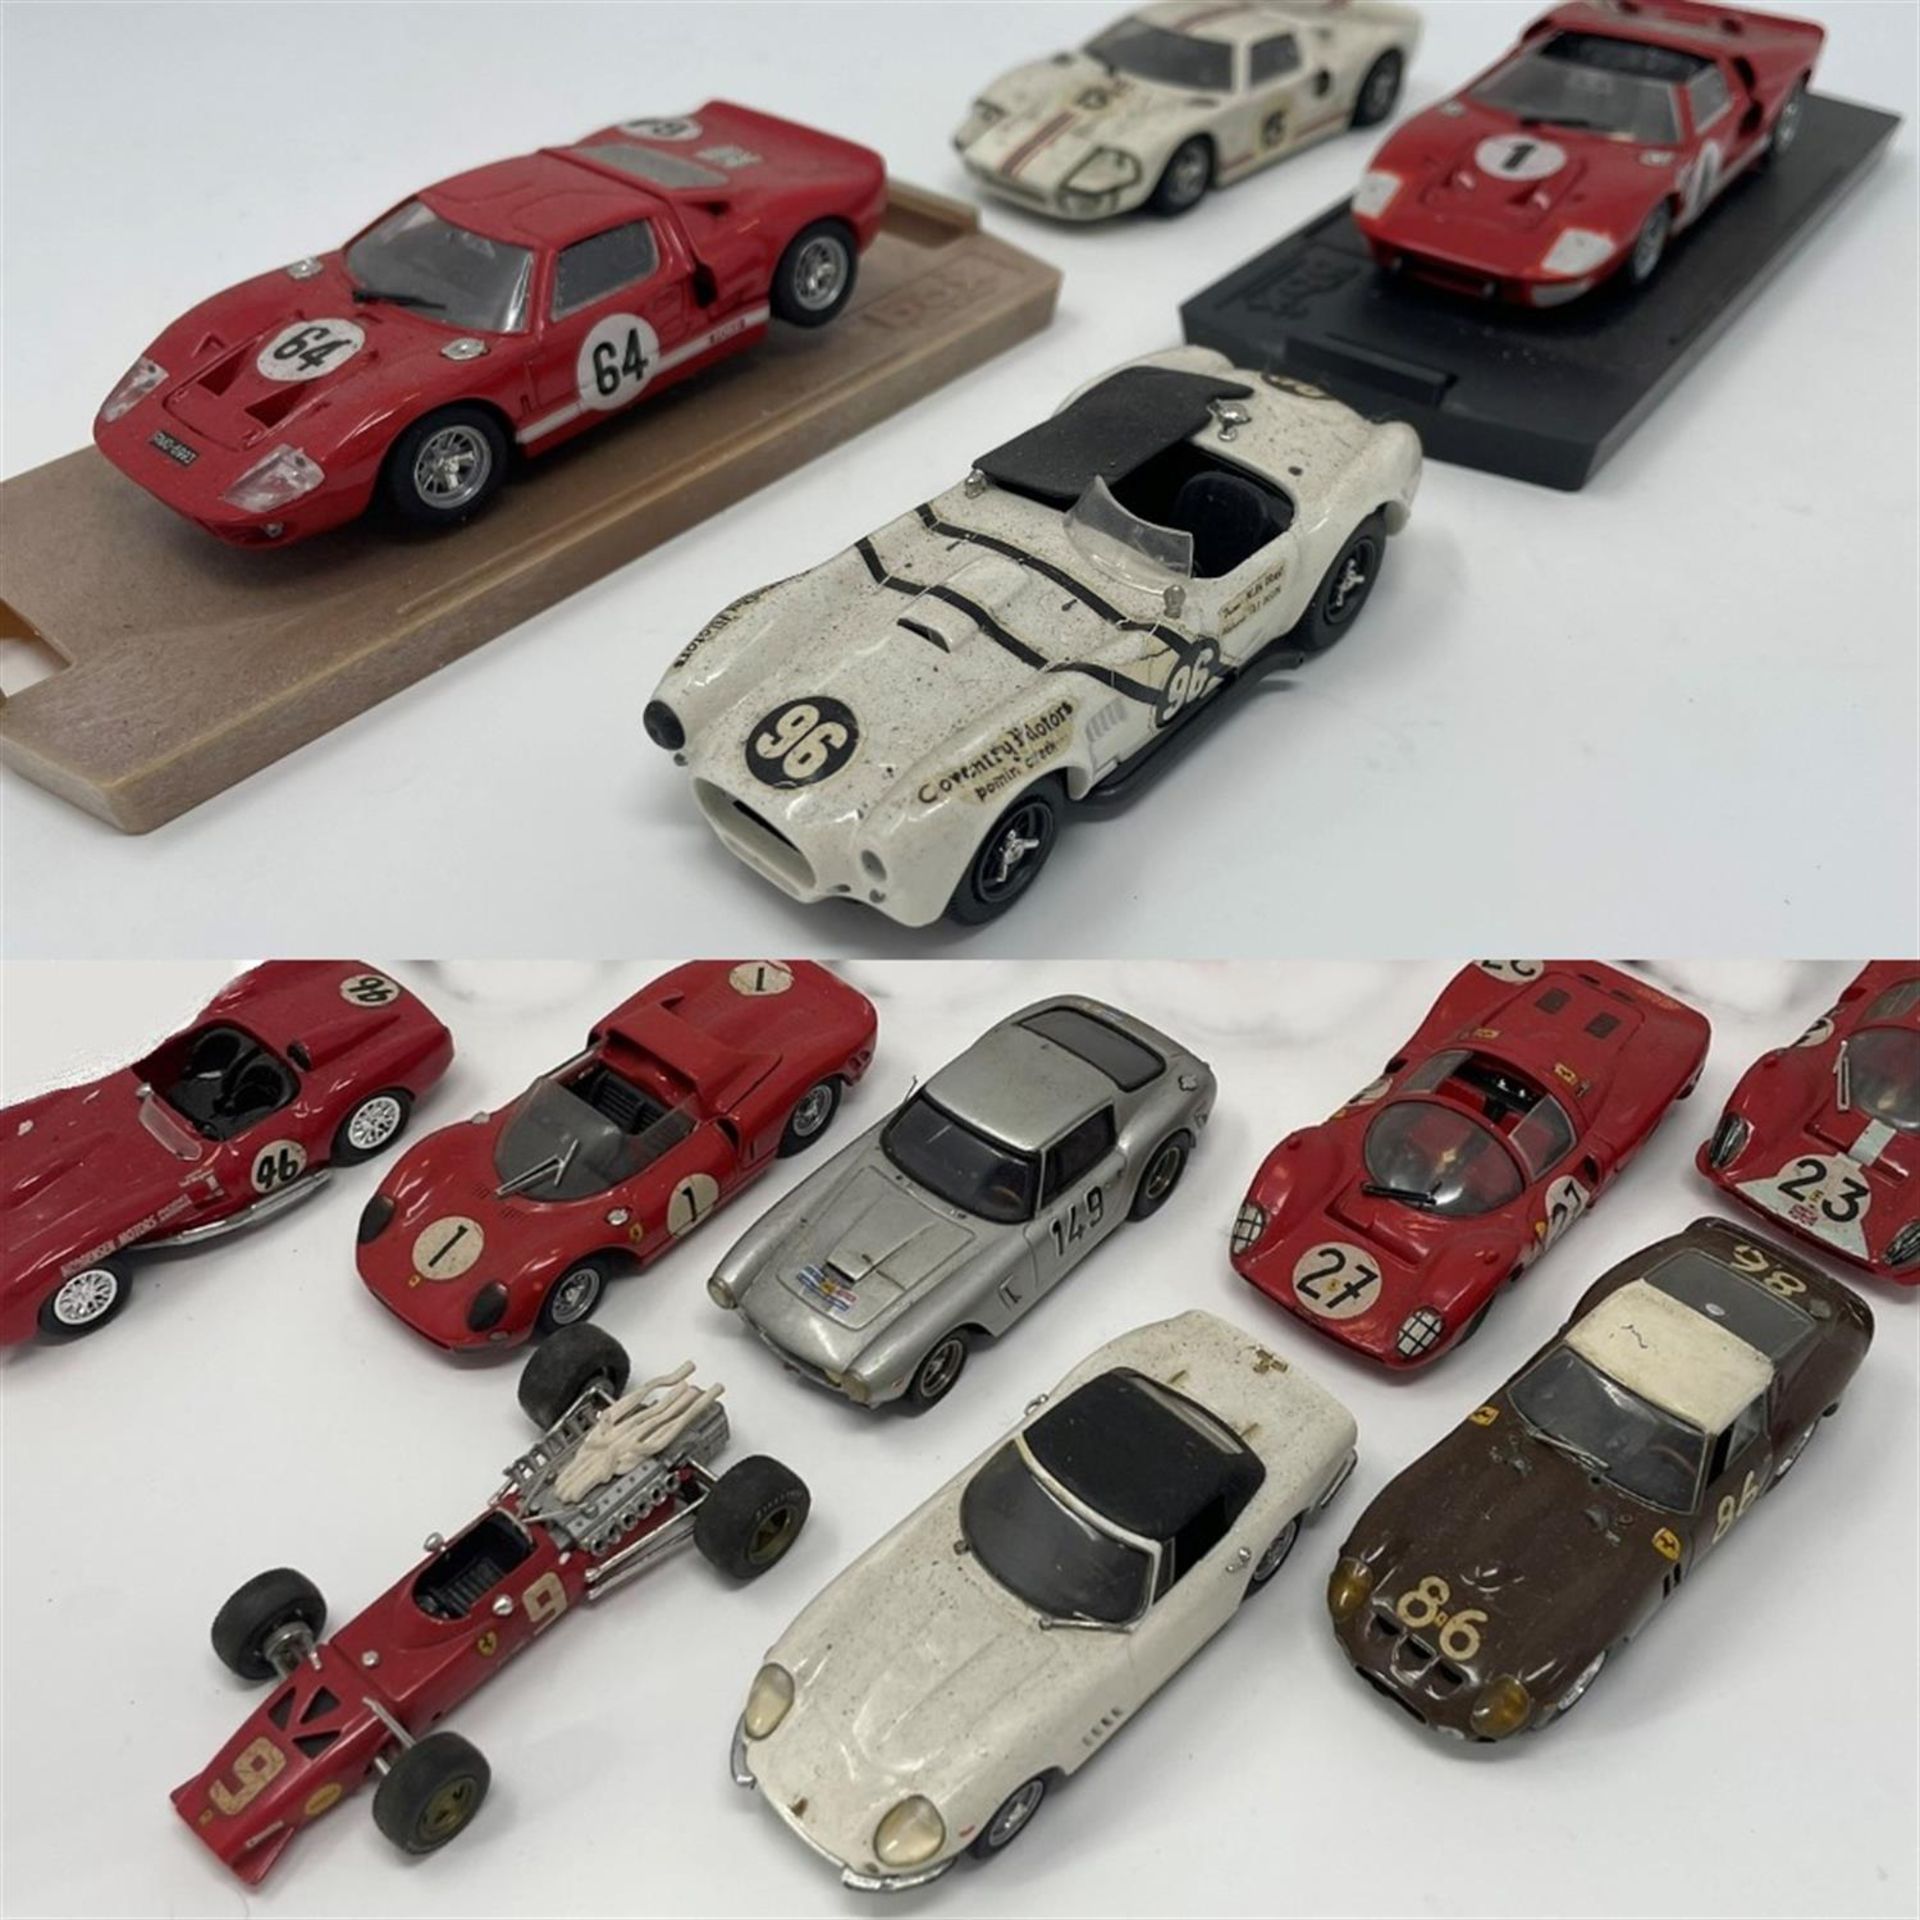 A Dozen 1/43rd Scale Classic Model Cars From the 1950s, 60s and 70s